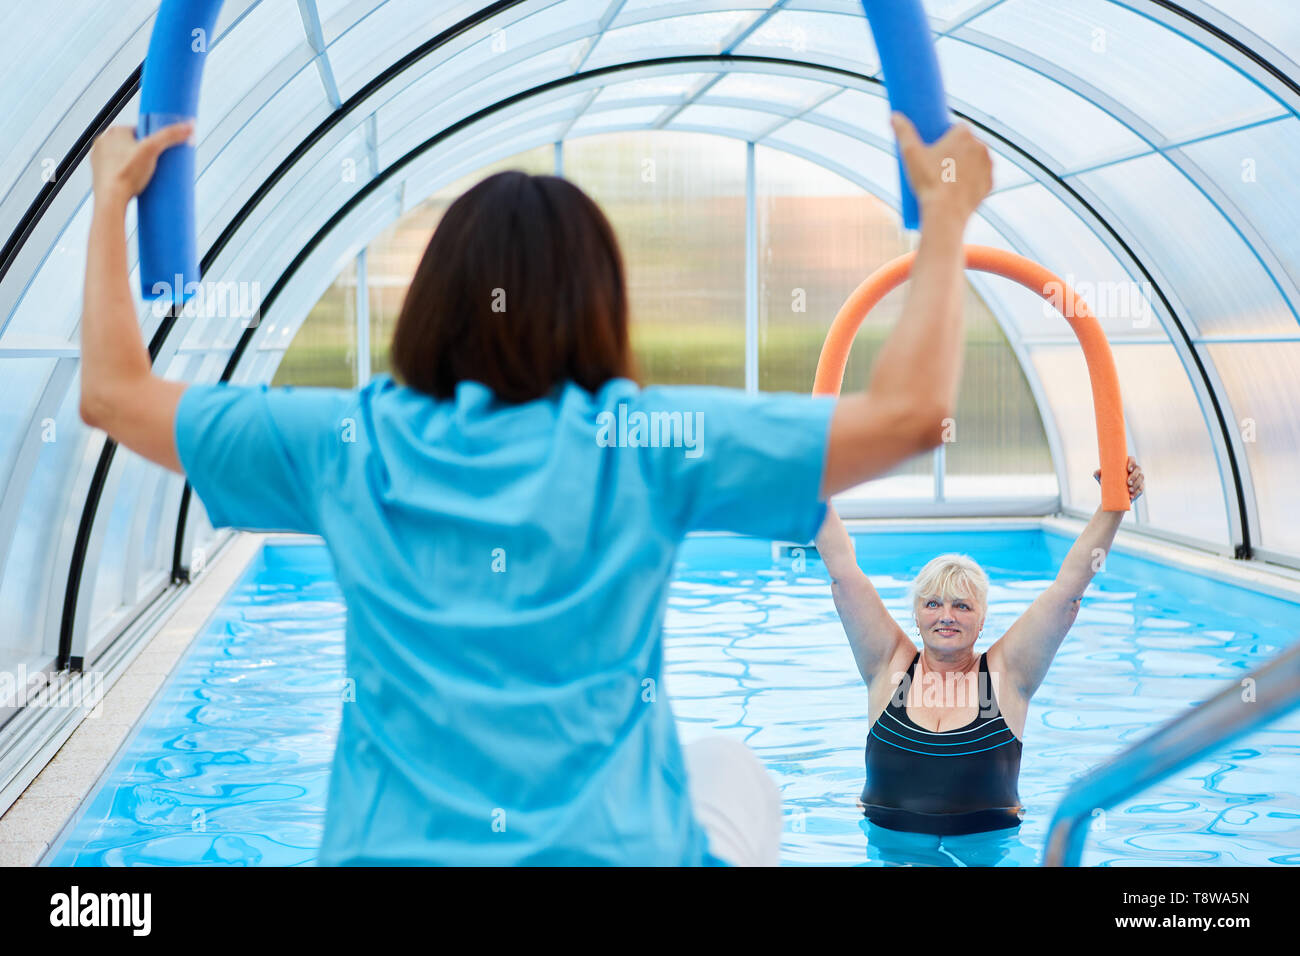 Therapist with swimming noodle shows a senior woman doing aquagym exercise Stock Photo